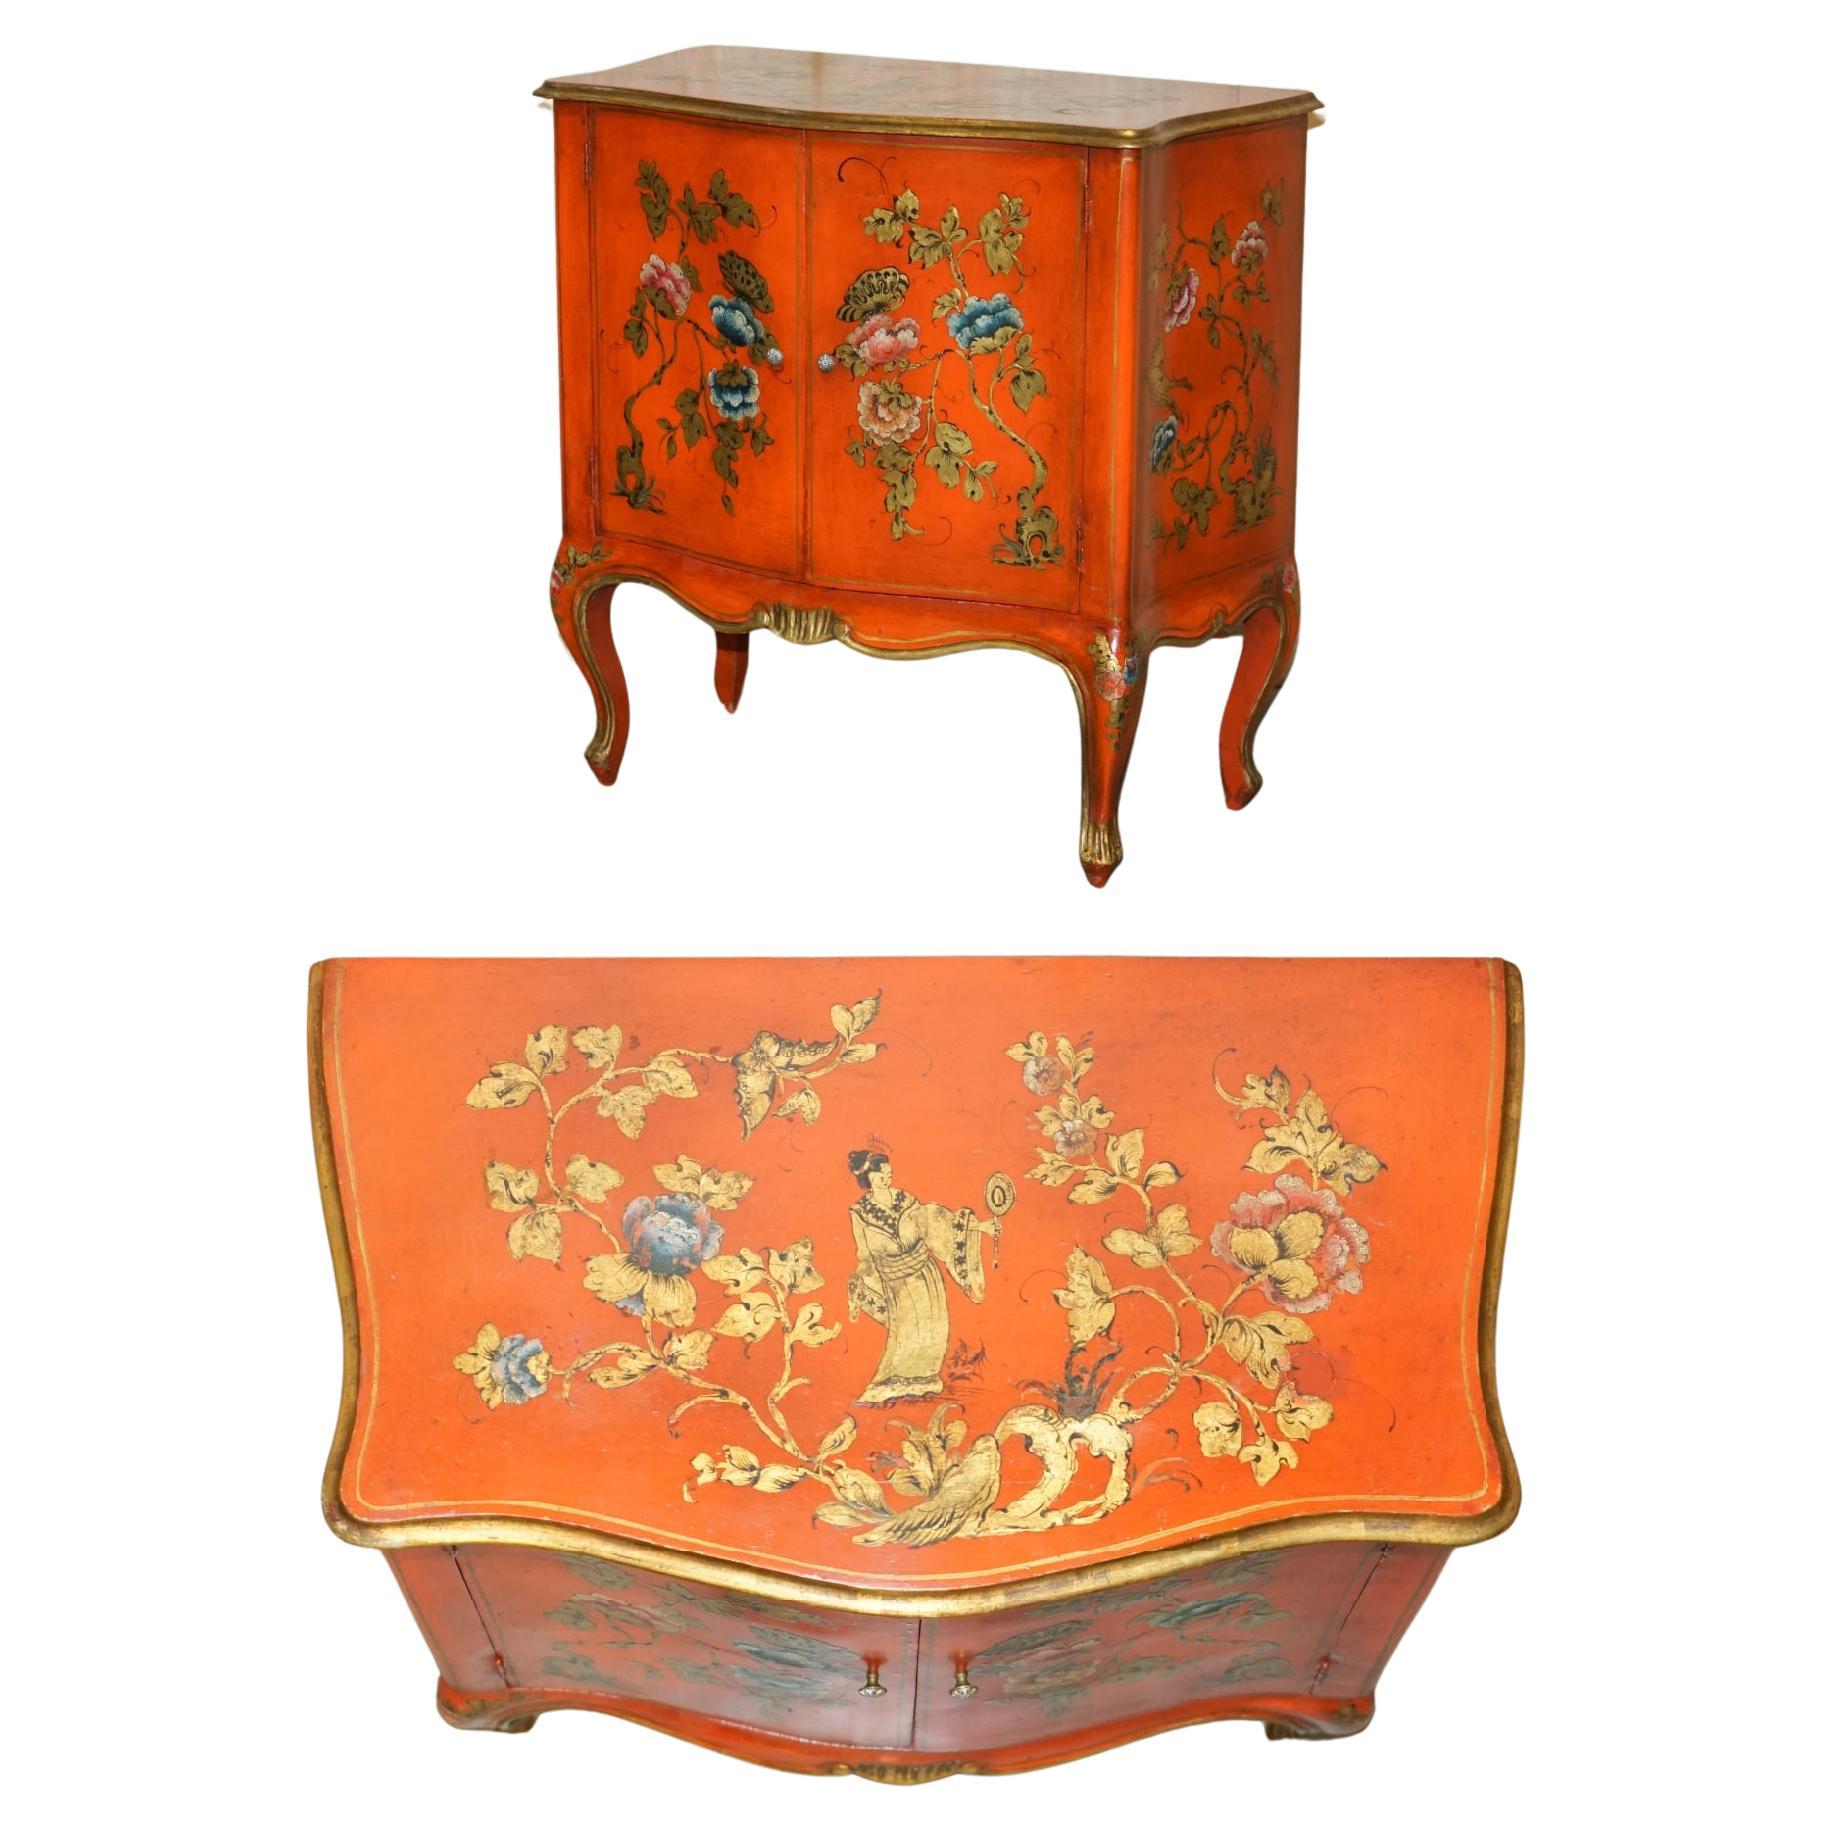 STUNNING 1920's VINTAGE CHINESE CHINOISERIE GEISHA GIRLS LACQUER SIDE CABINET For Sale